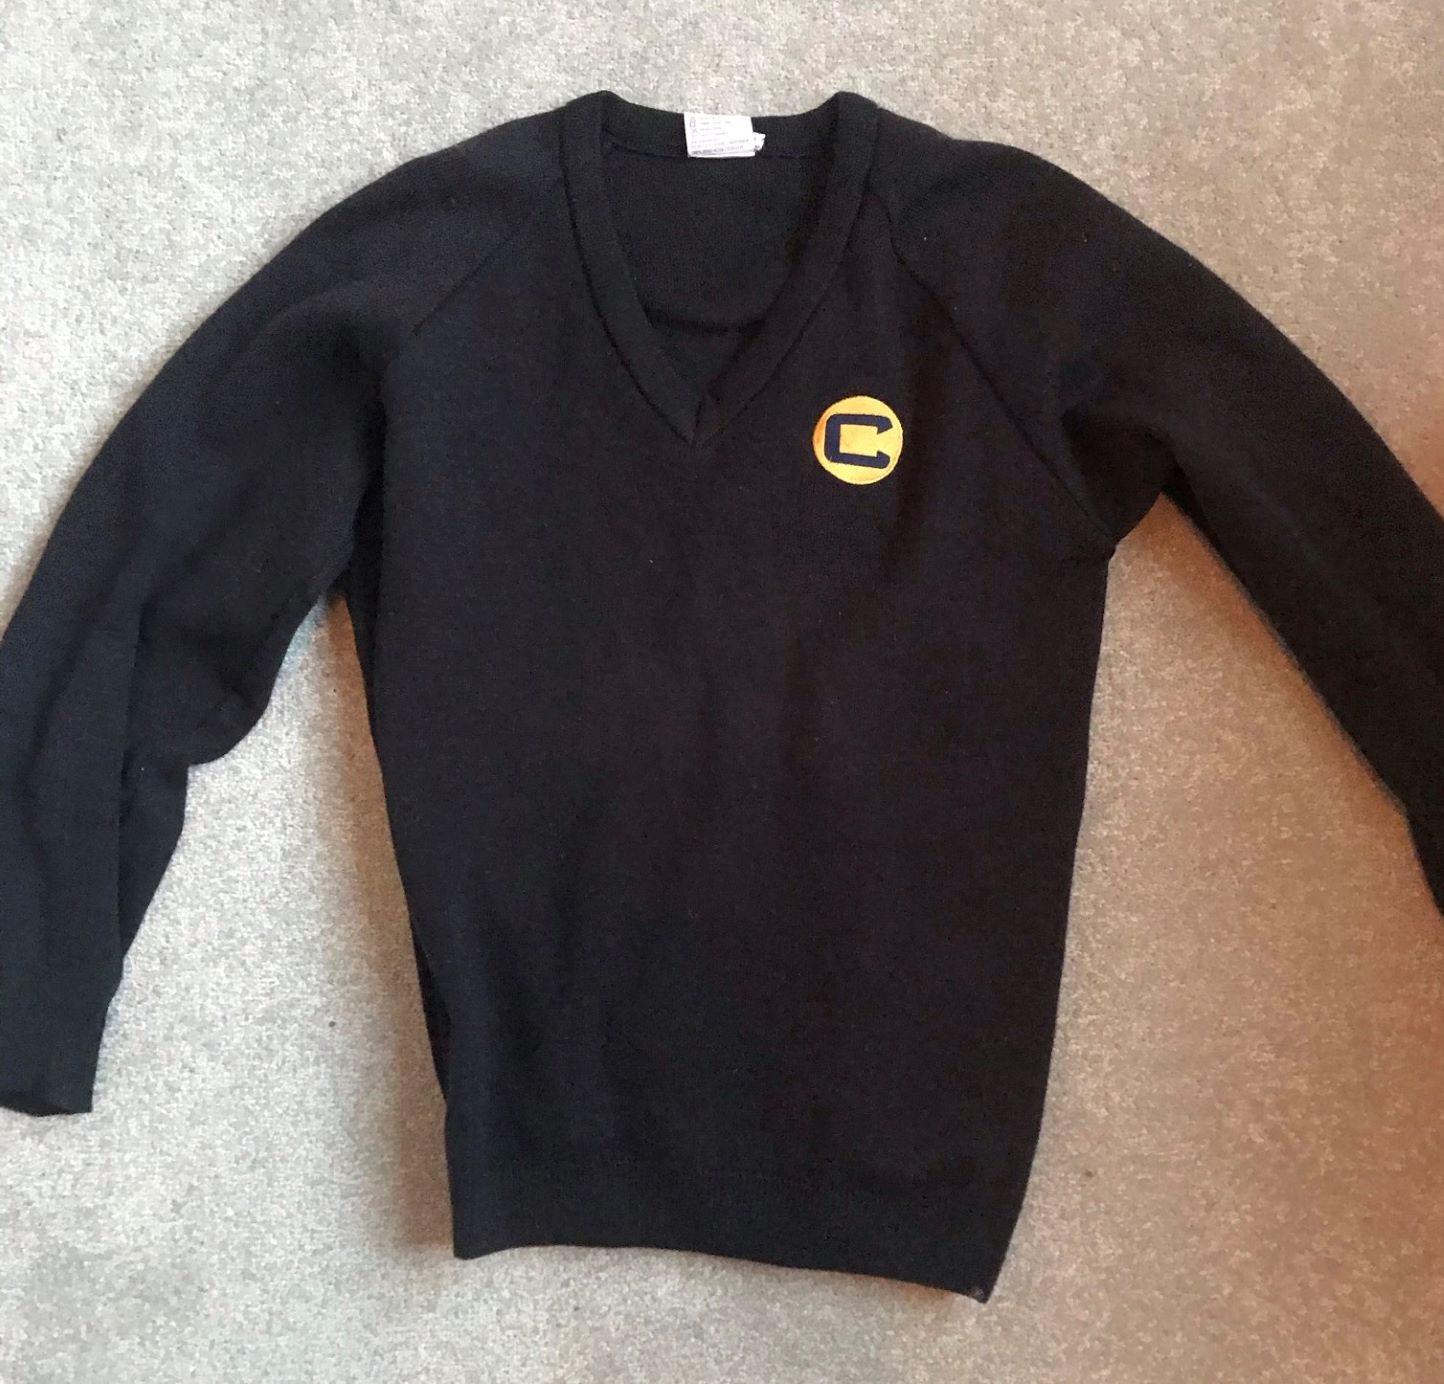 Charter North Jumper: Size 36 (marked)